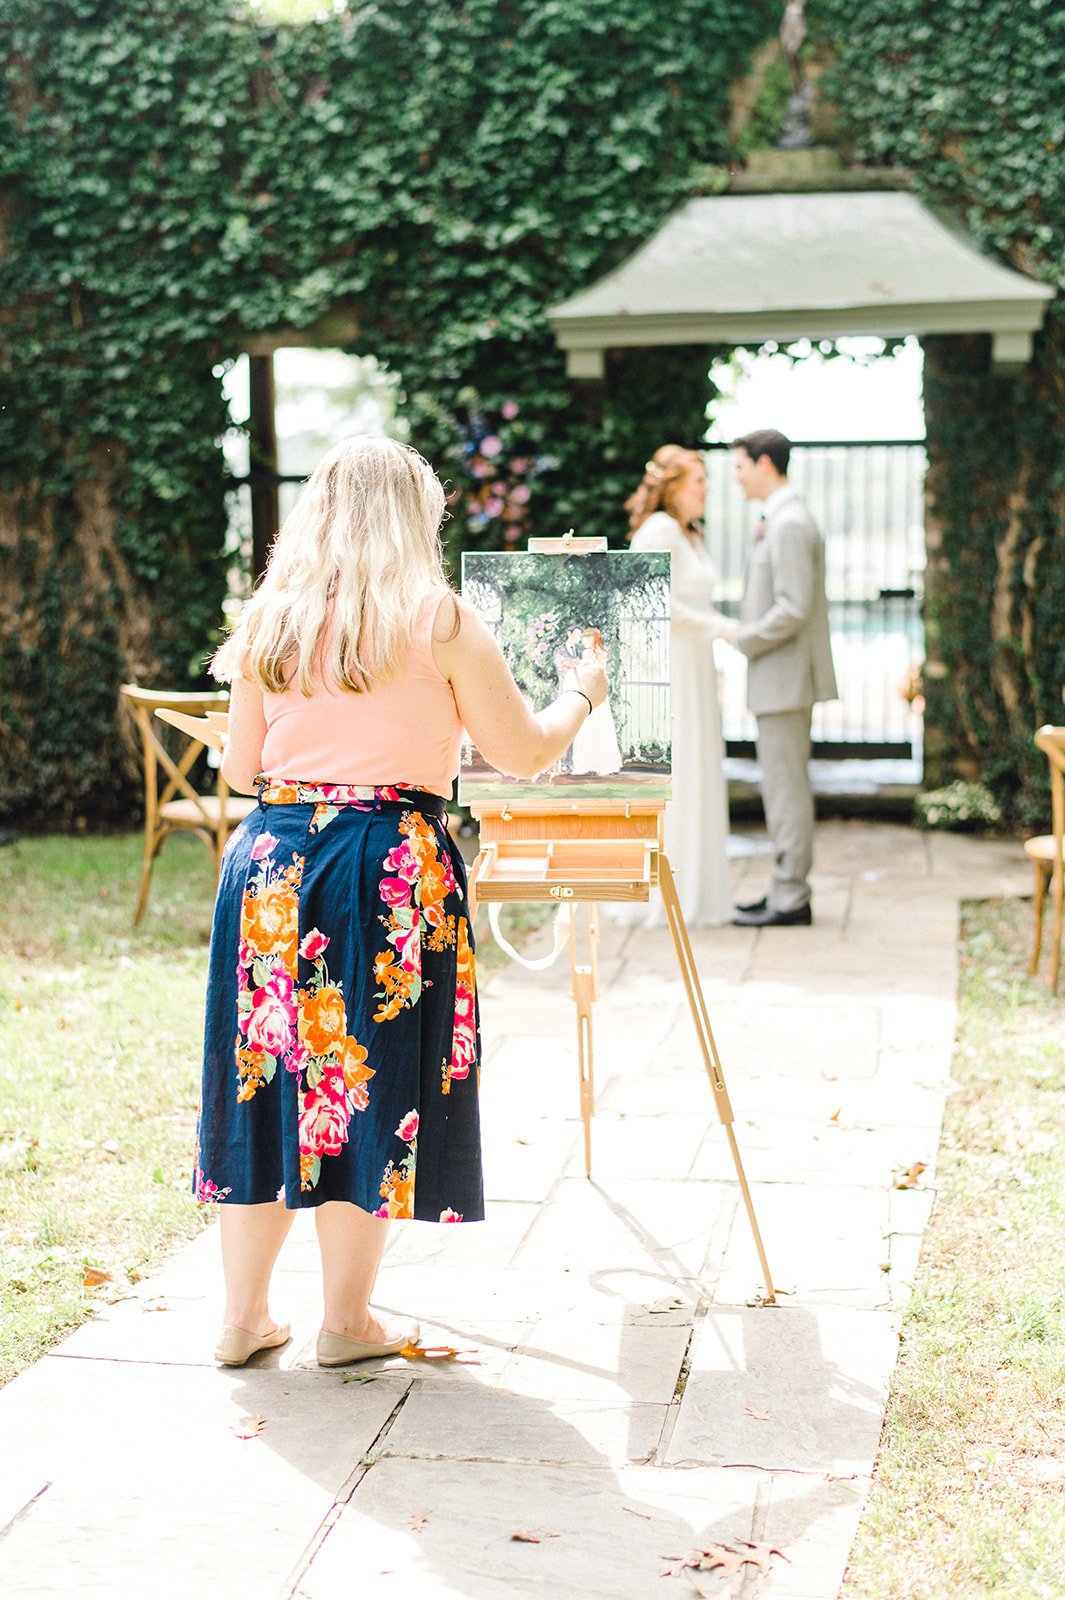 Live wedding painter at styled shoot